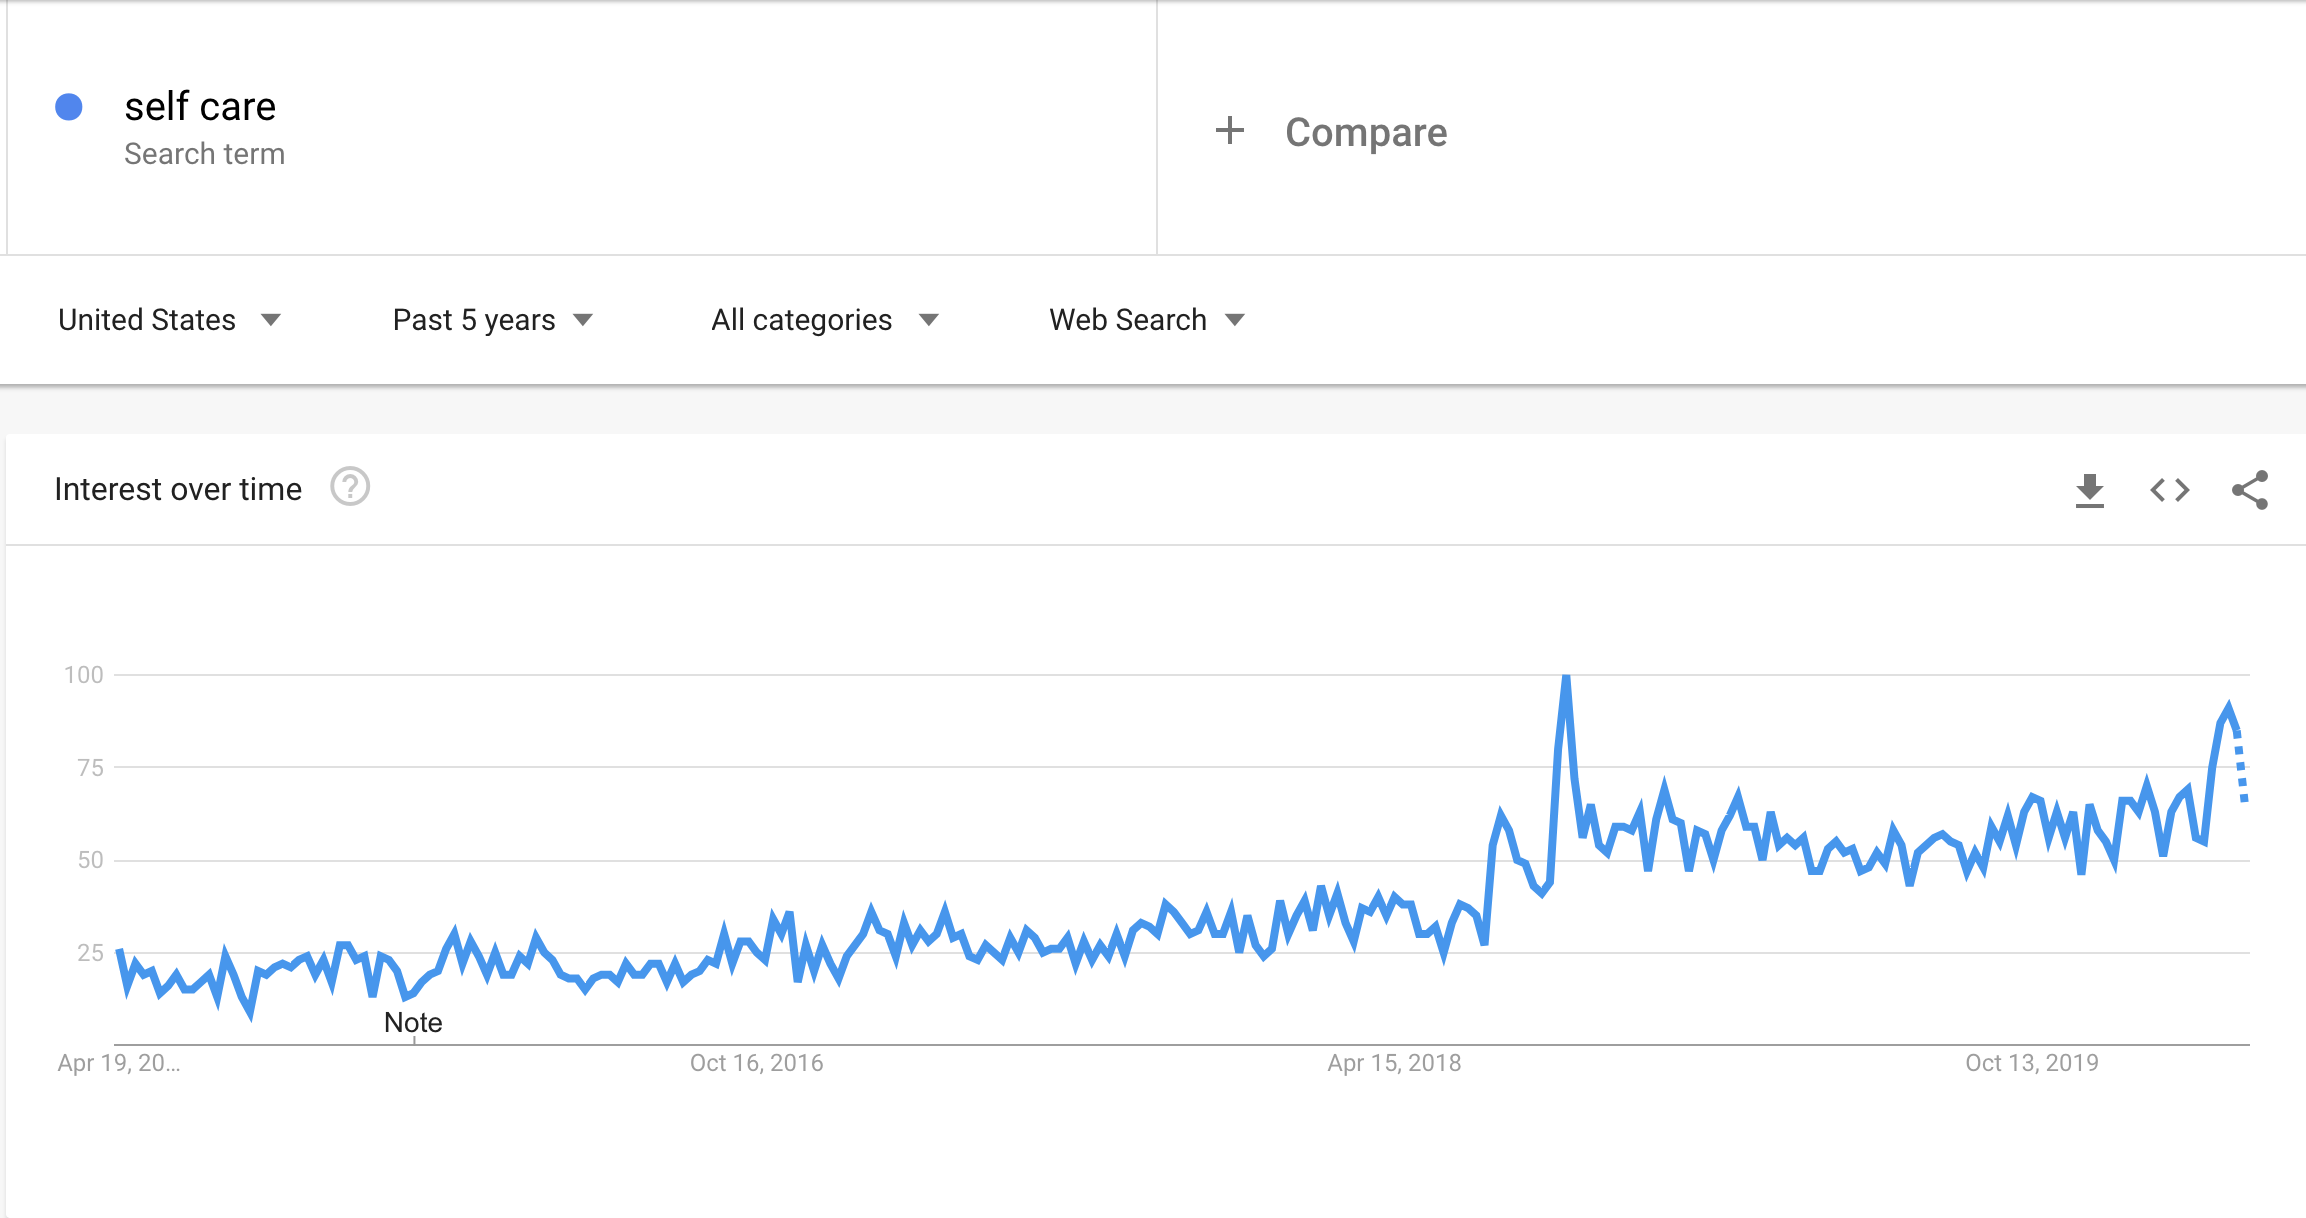 Search volume for “self care” from April 2015 to April 2020. 